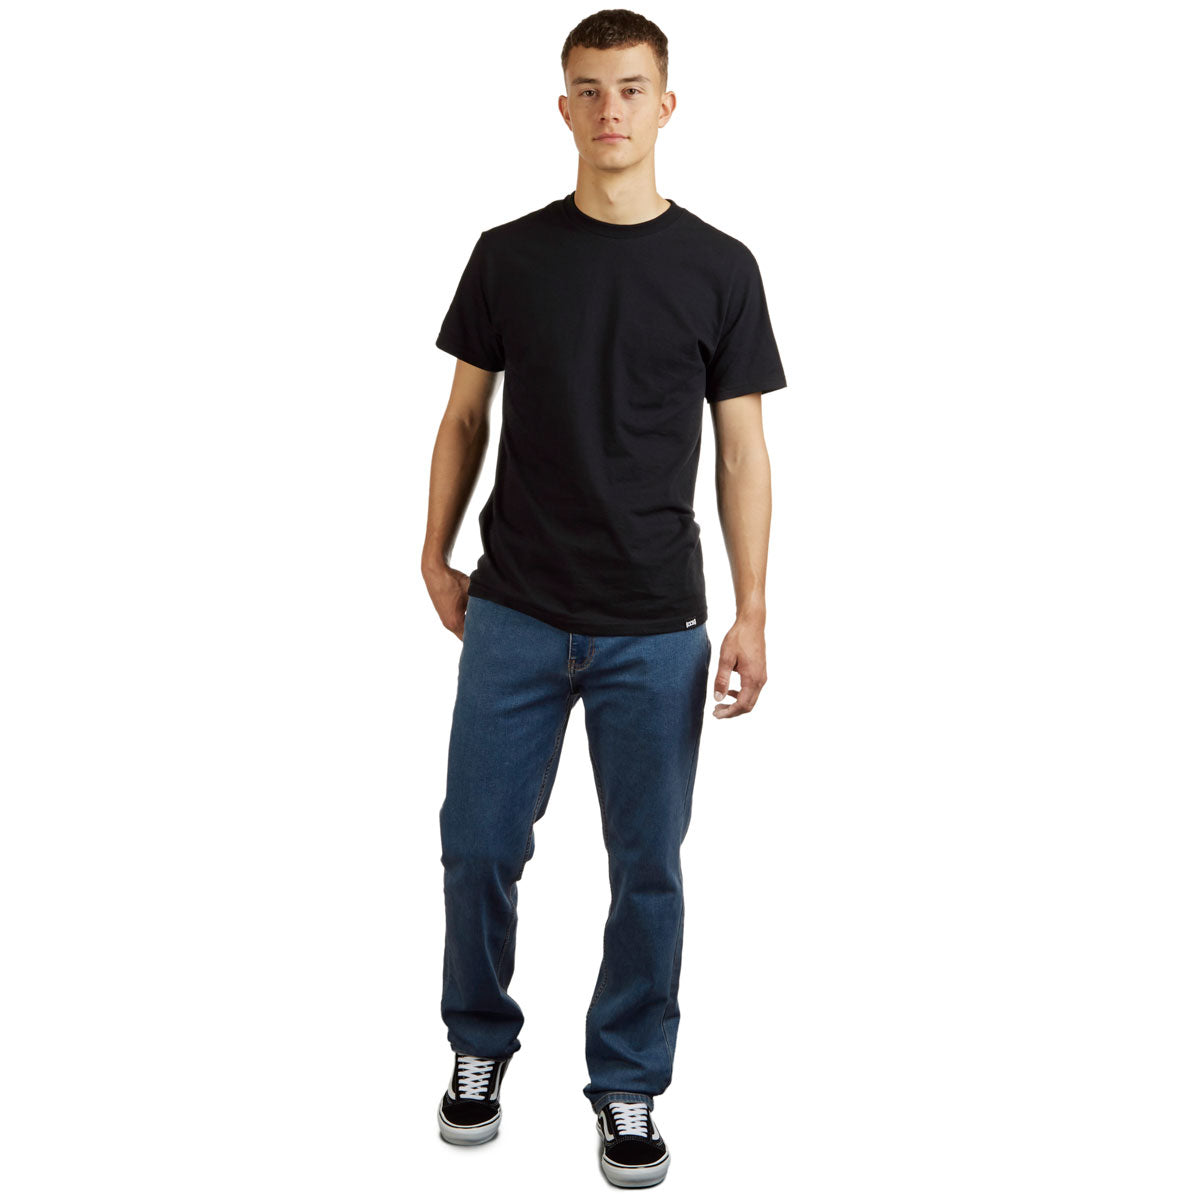 CCS Standard Plus Relaxed Denim Jeans - New Rinse image 2